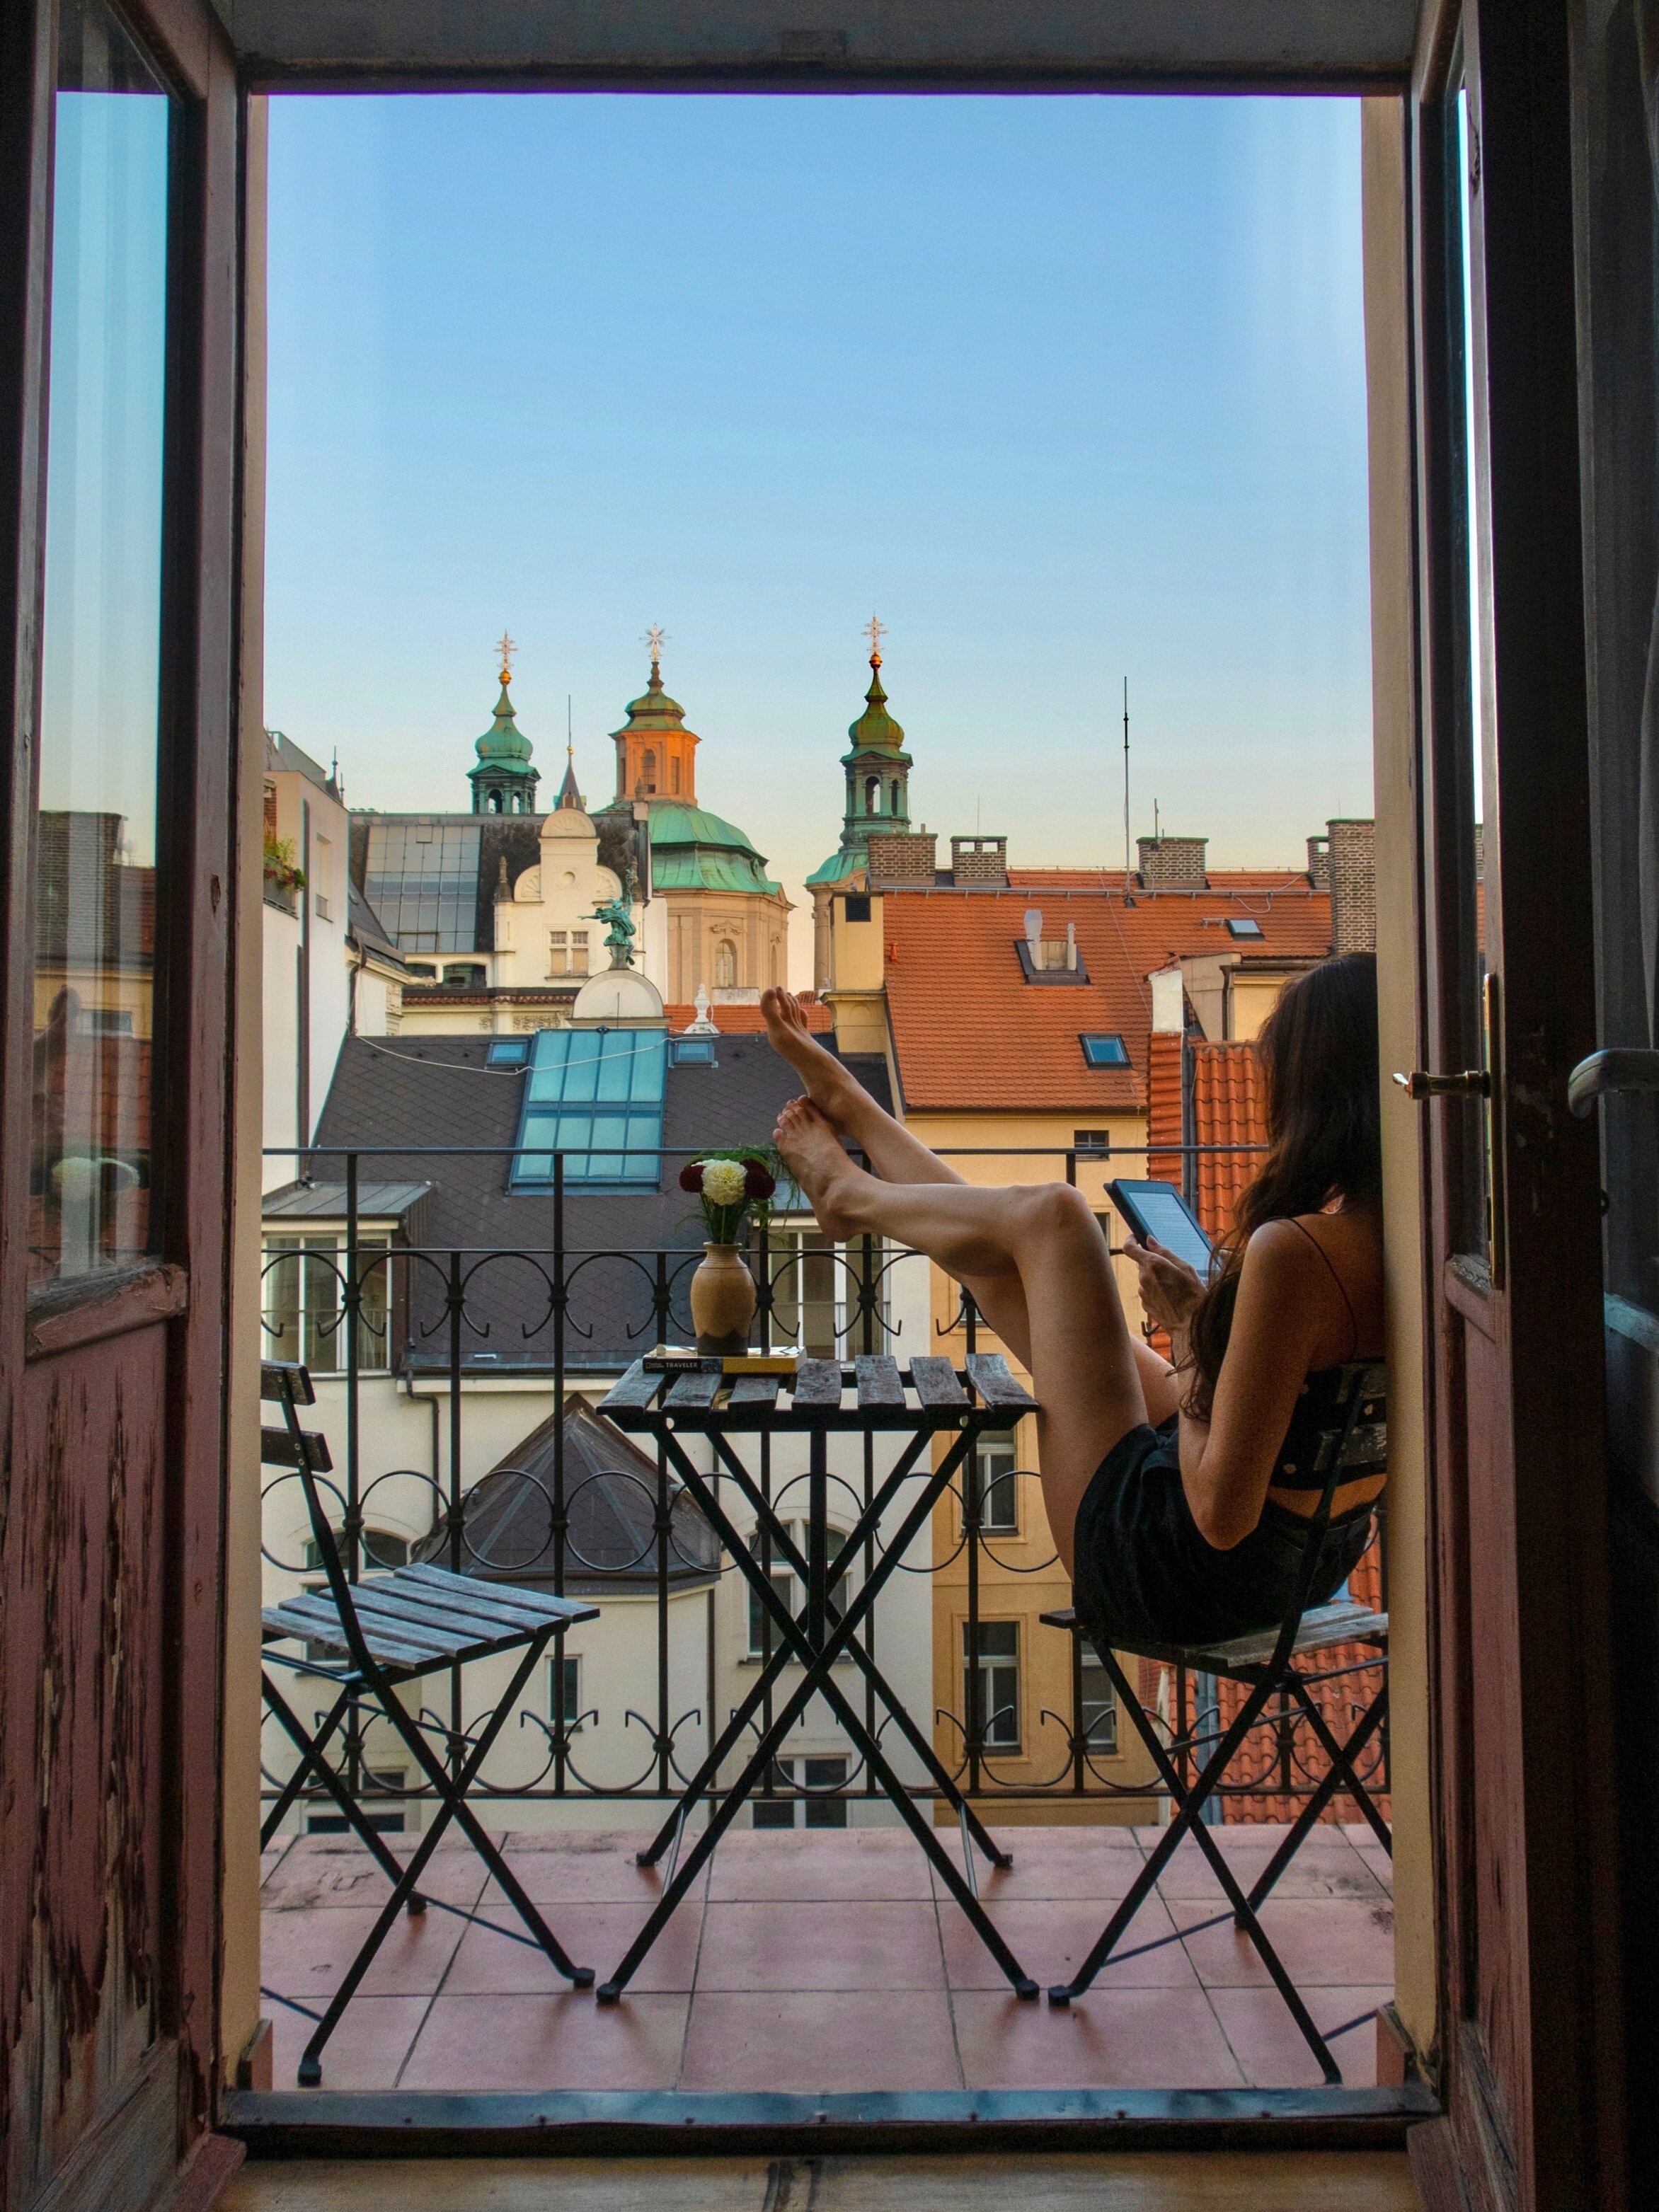 How to List Your Boutique Hotel on Airbnb